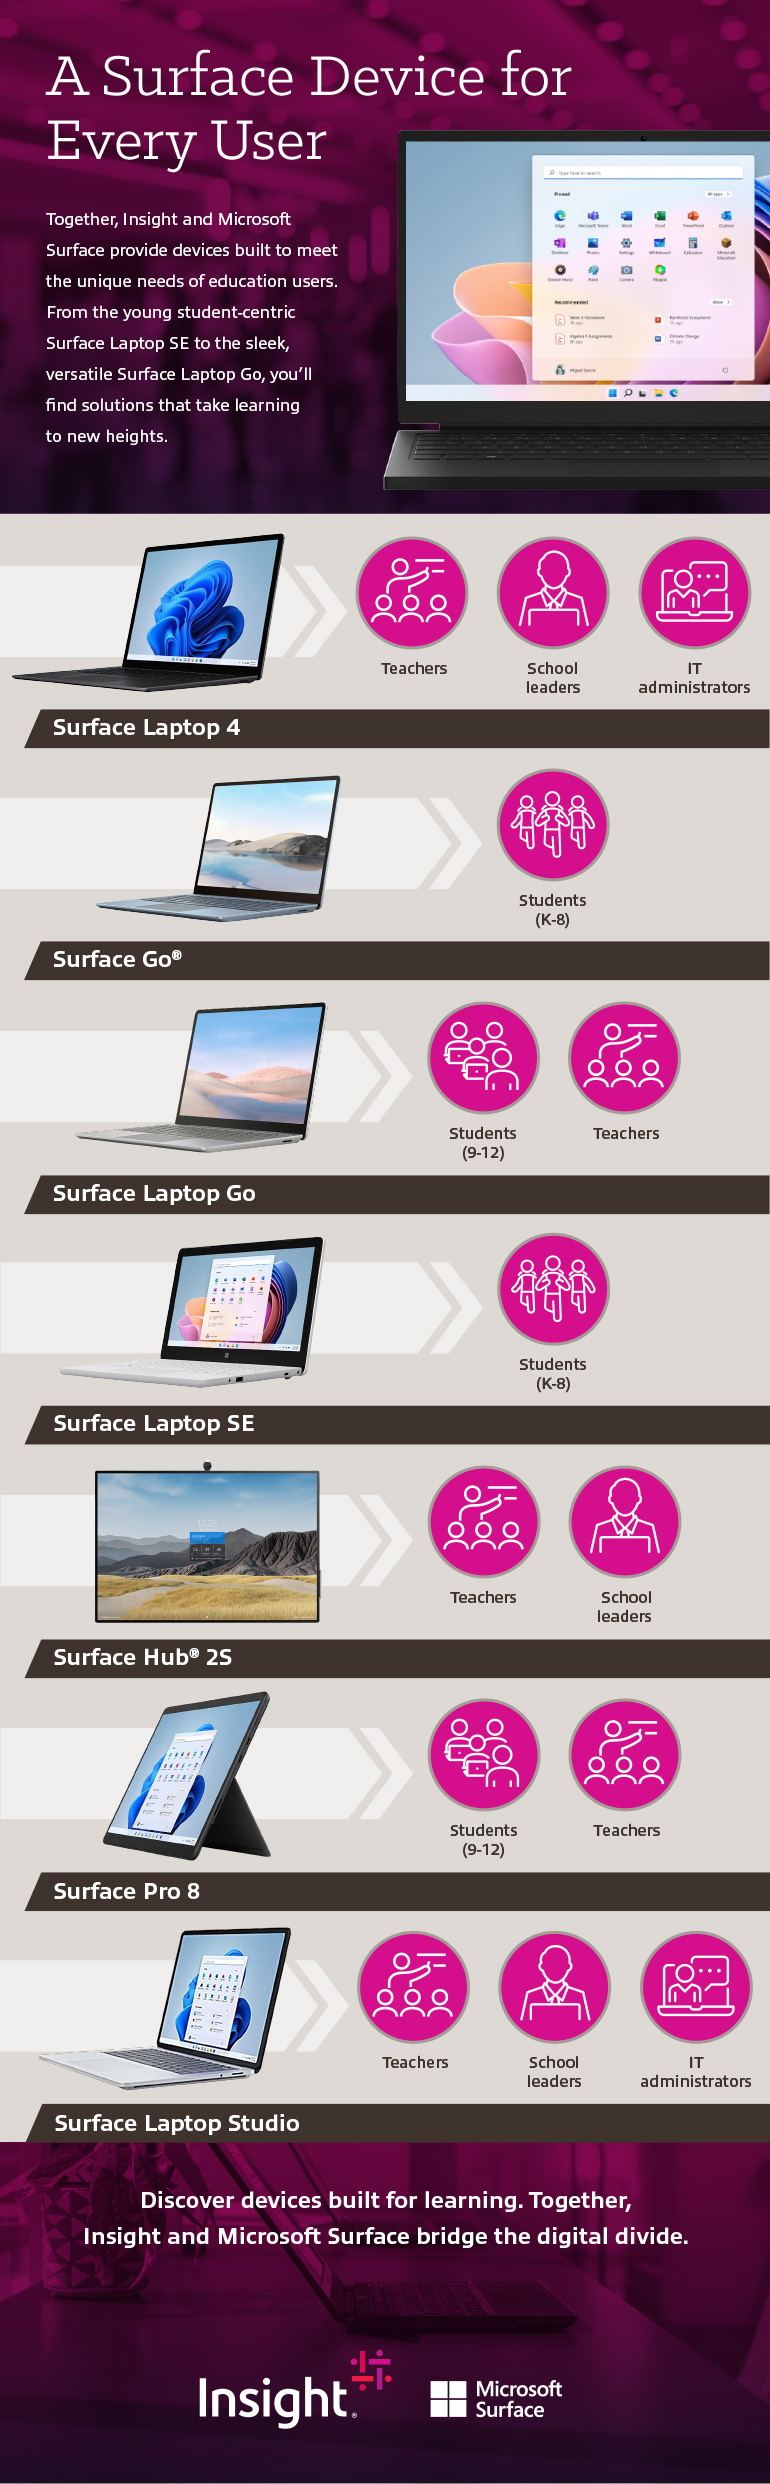 A Surface Device for Every User infographic